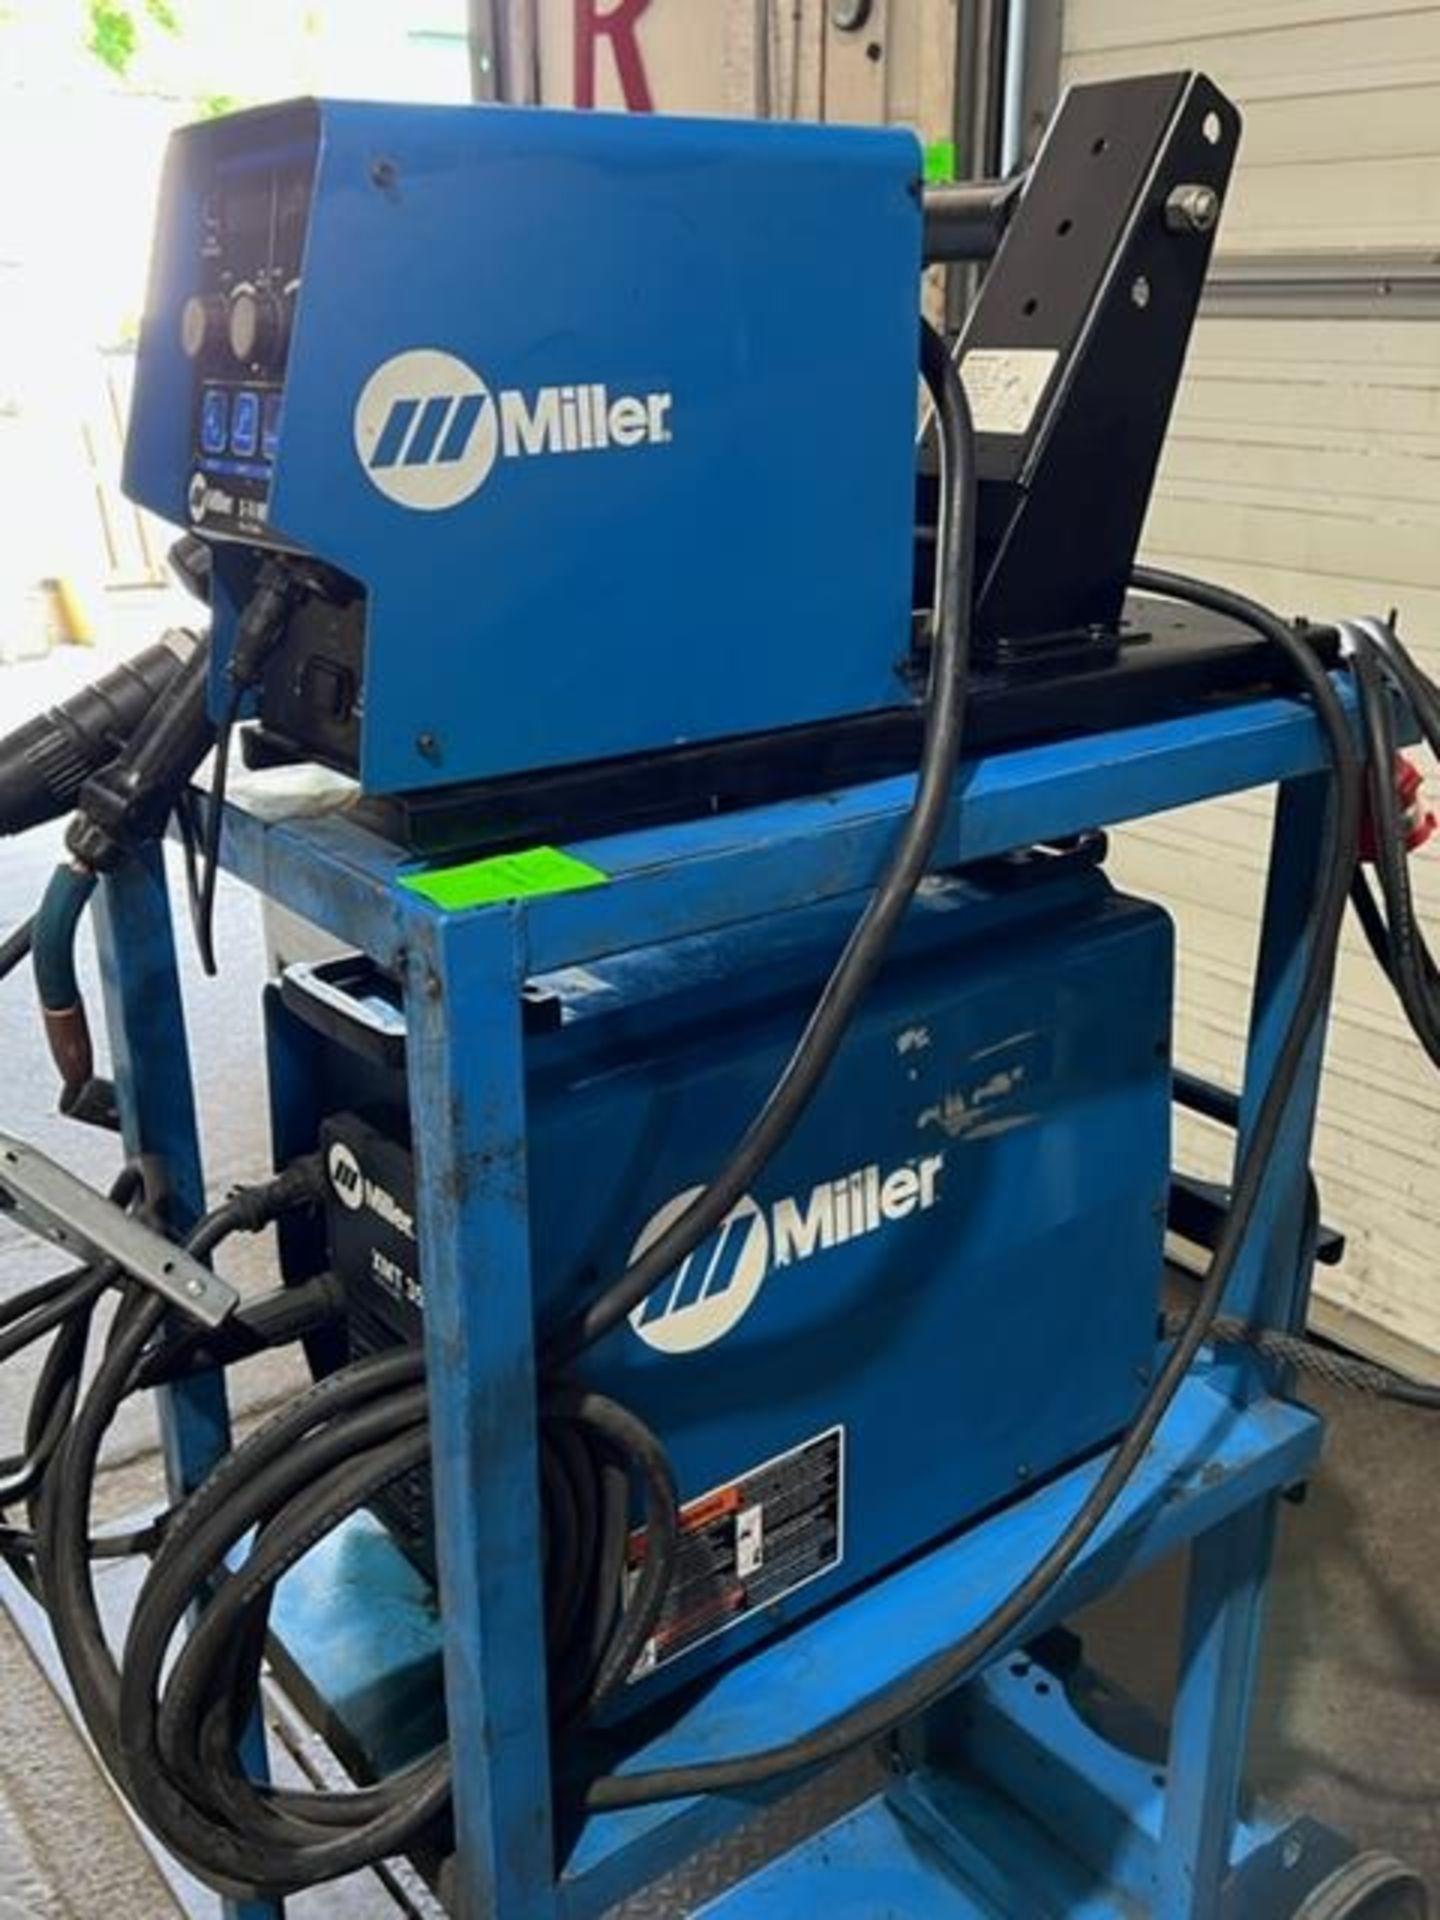 Miller XMT 350 CC/CV Multiprocess Welder with S-74MPA Plus Wire Feeder 4-wheel - COMPLETE - Image 3 of 3